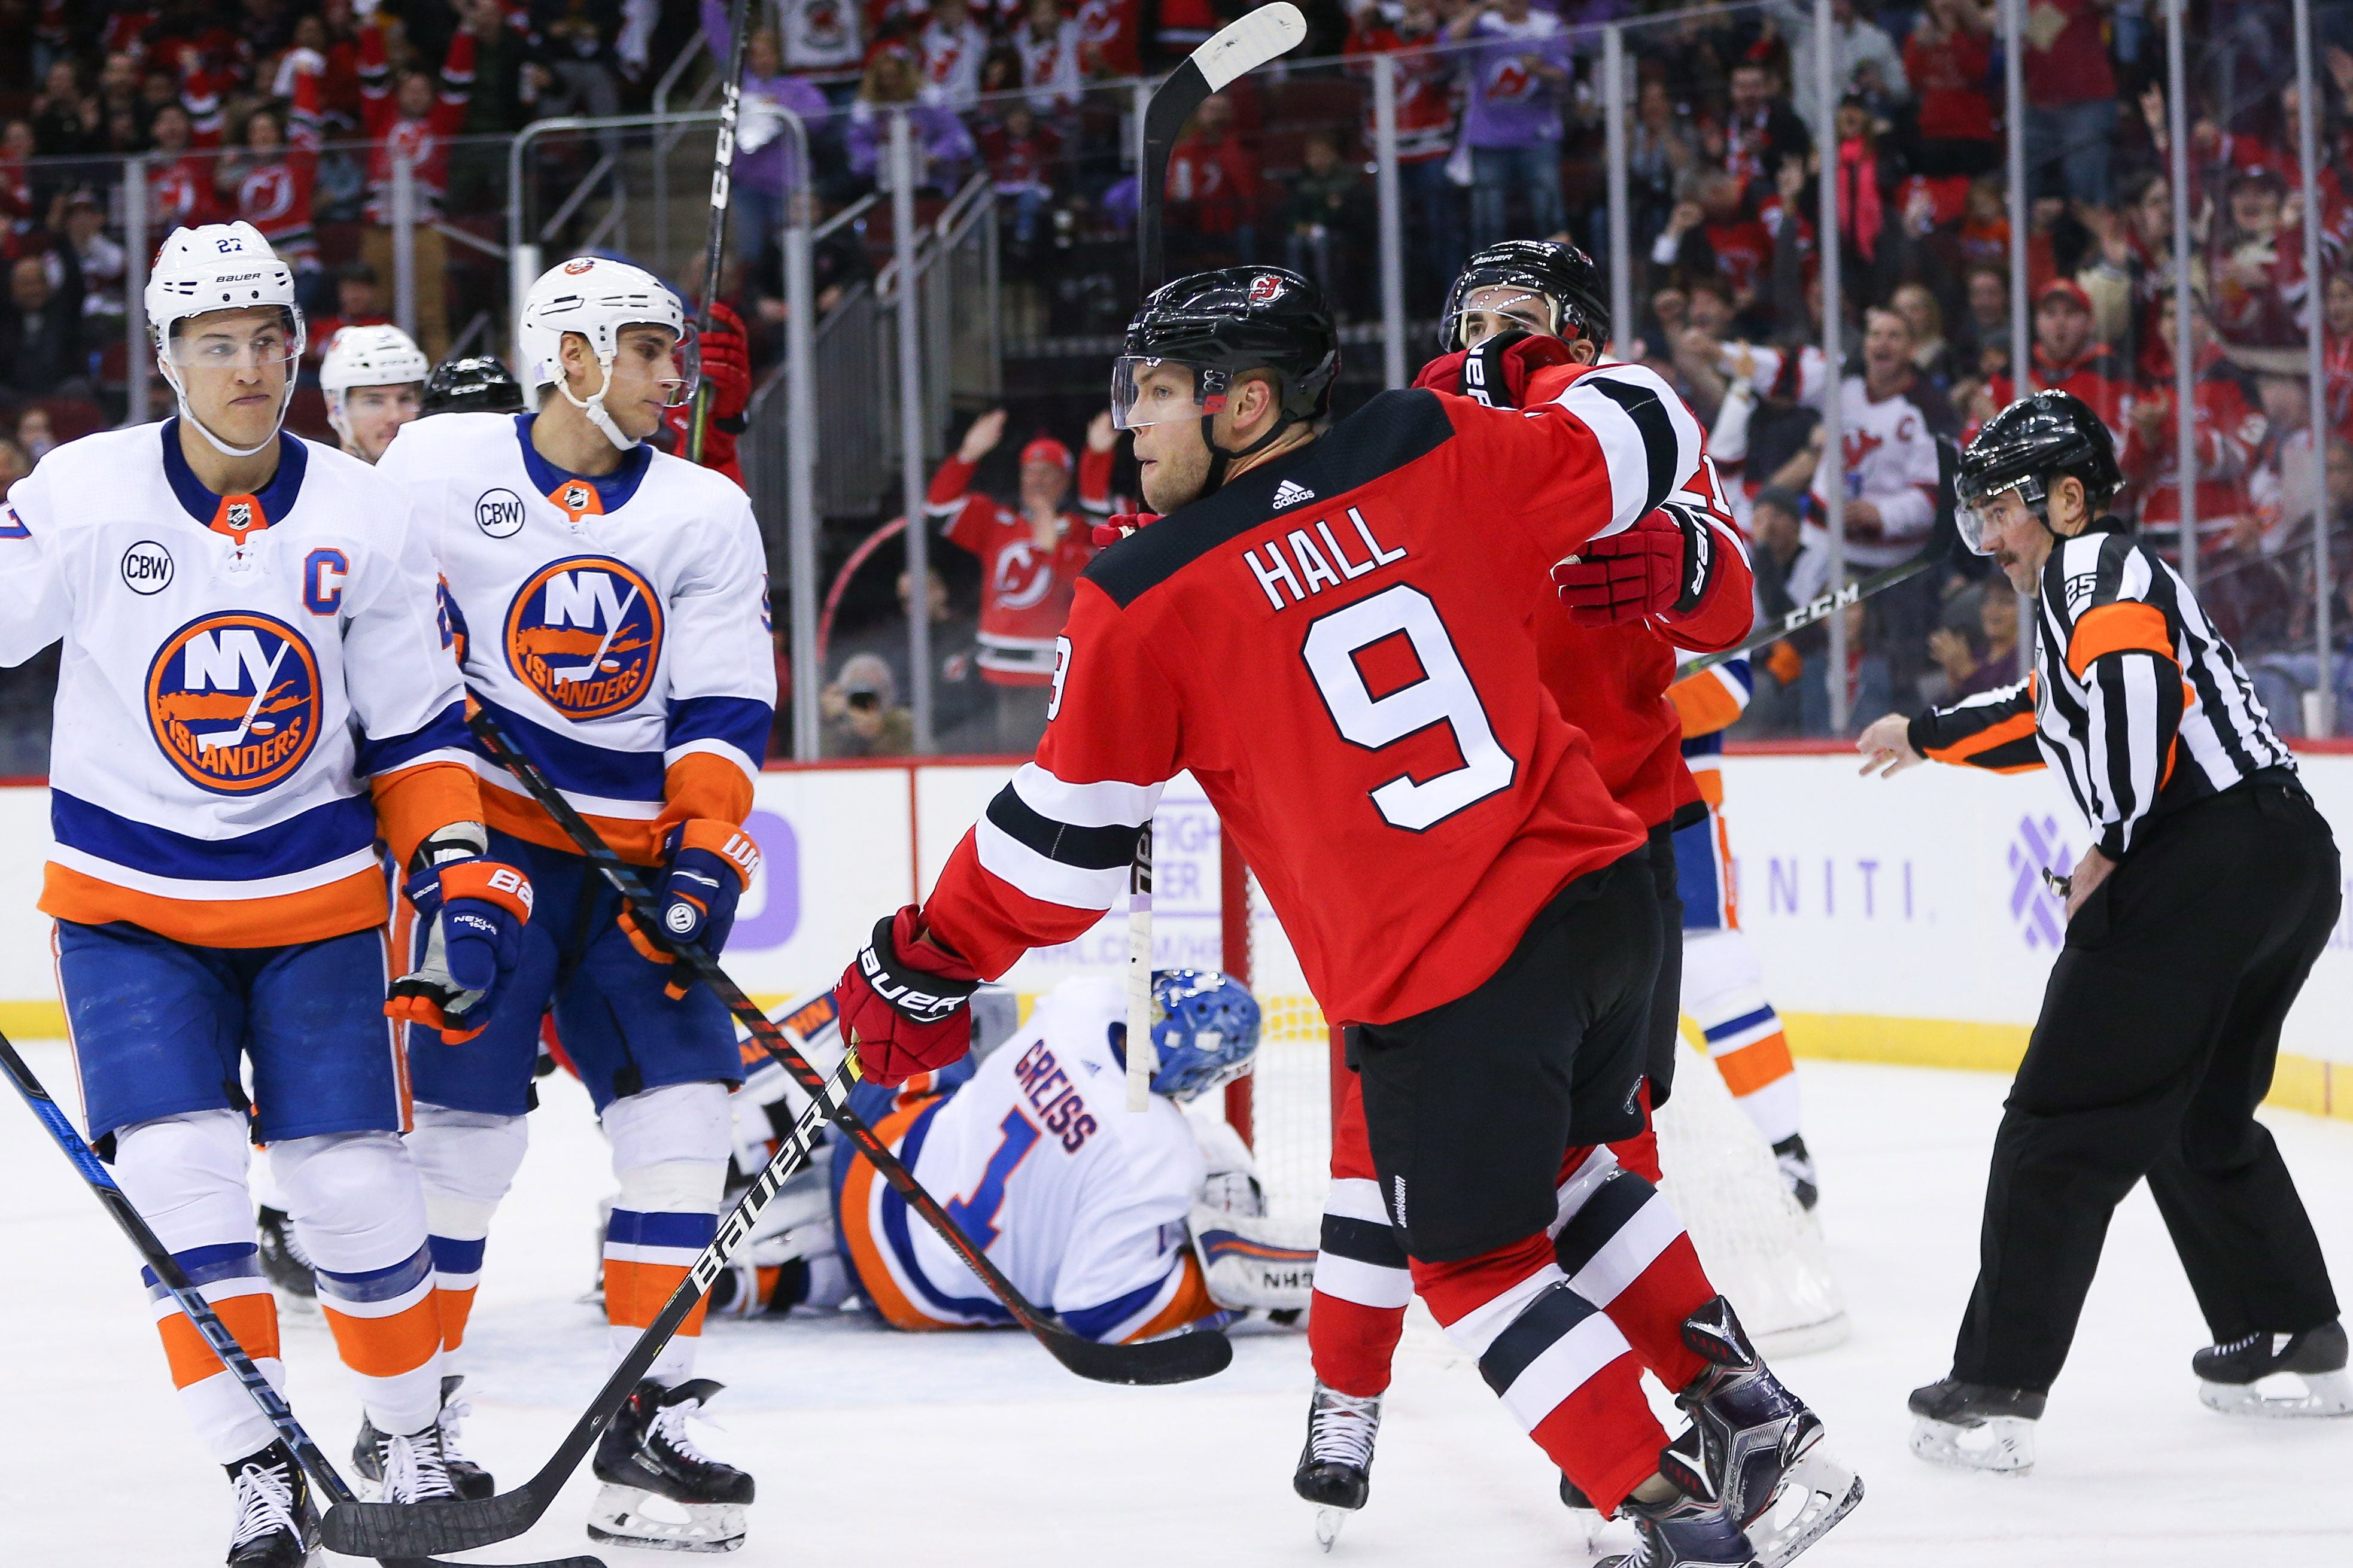 Taylor Hall is 'invested' in NJ Devils, John Hynes says